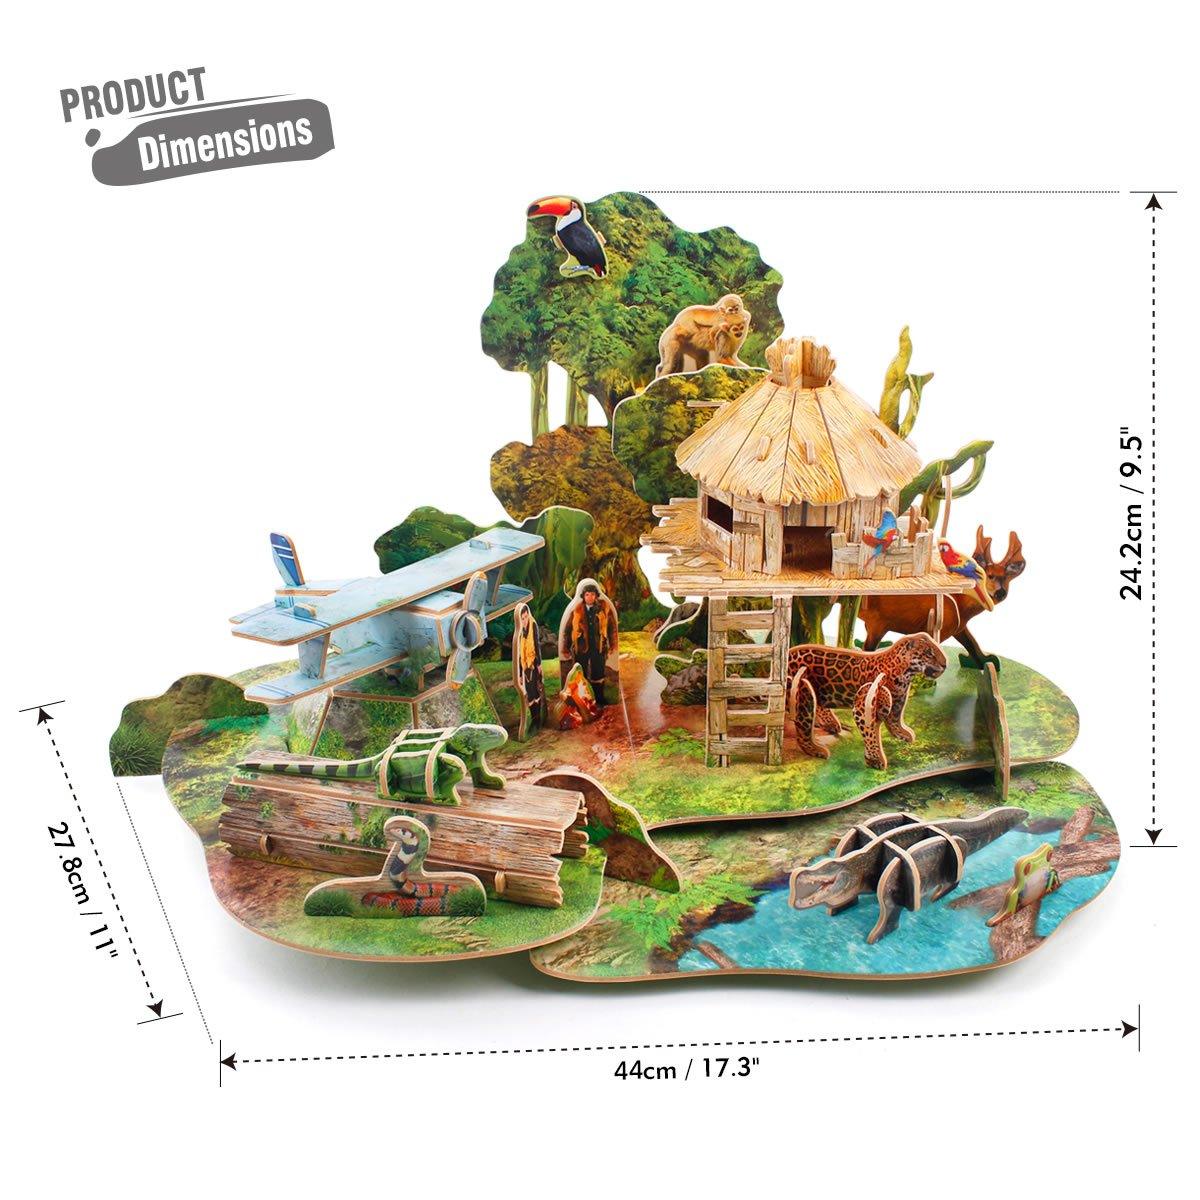 Frank Cubic Fun National Geographic -Amazon Rain Forest 3D Puzzle